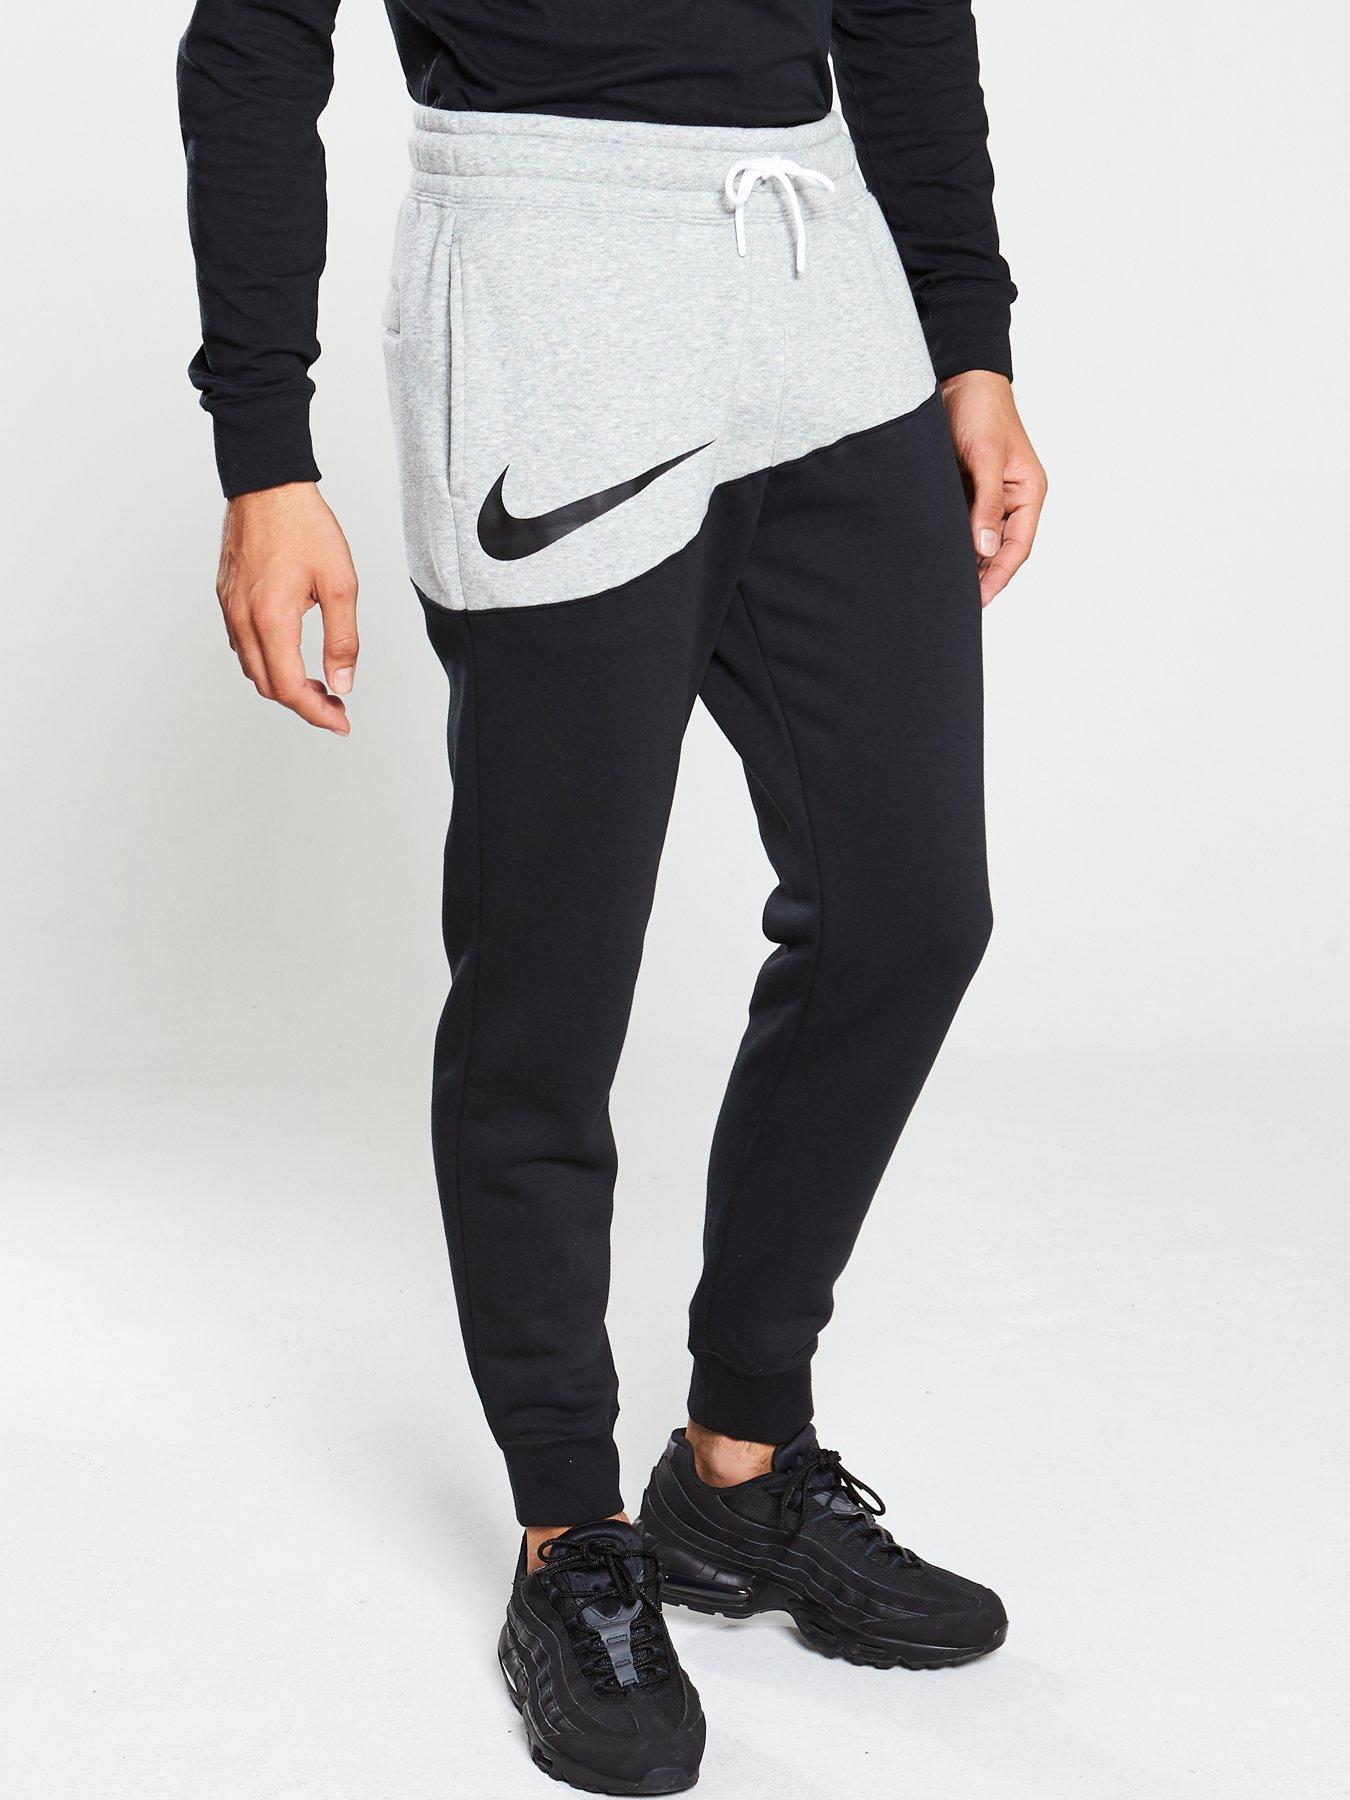 grey and black nike joggers